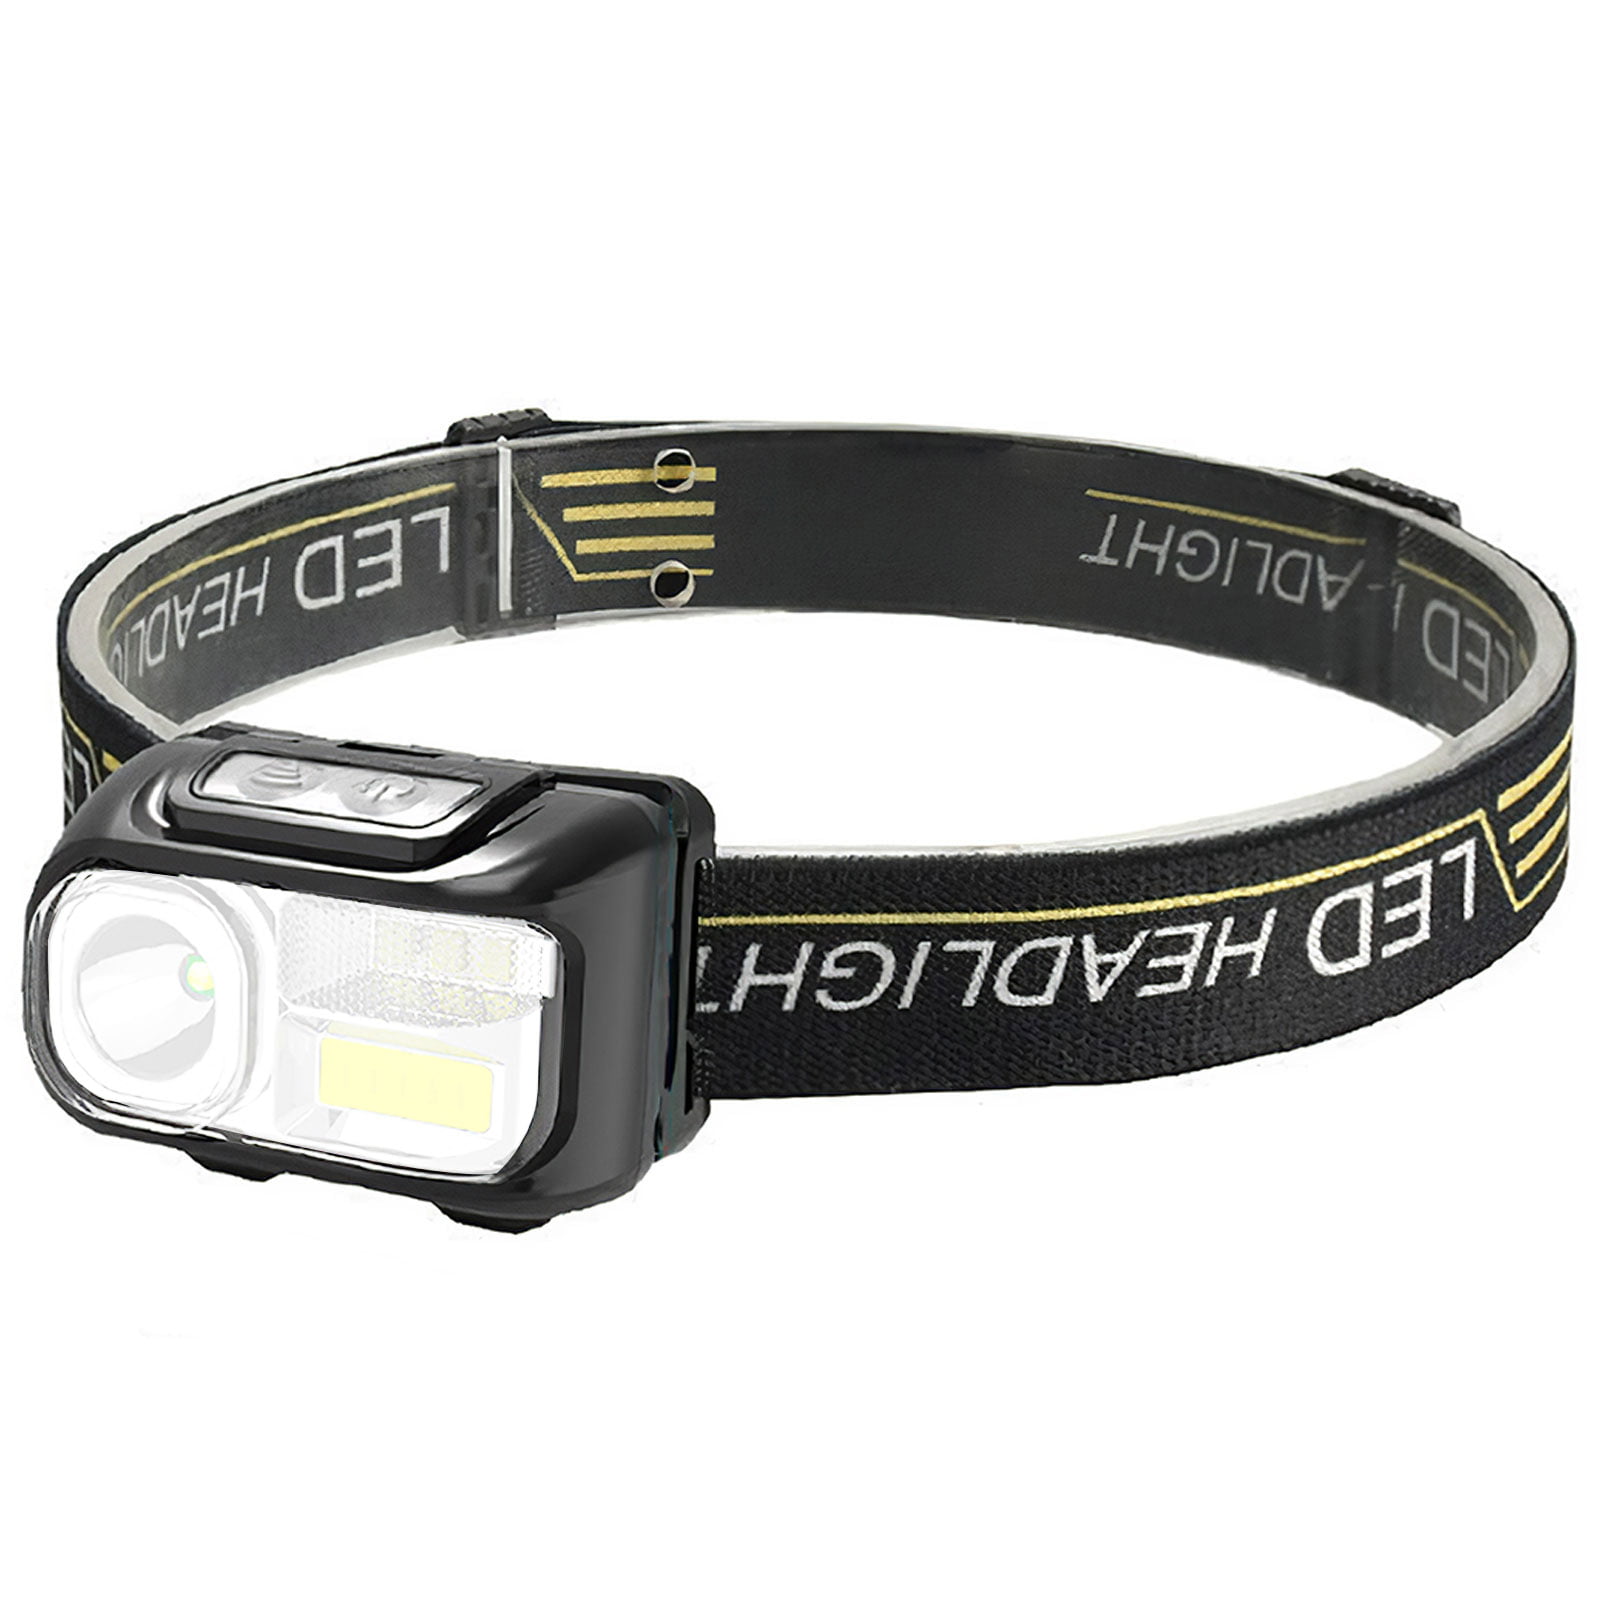 batteries included Powerful LED head torch adjustable strap 